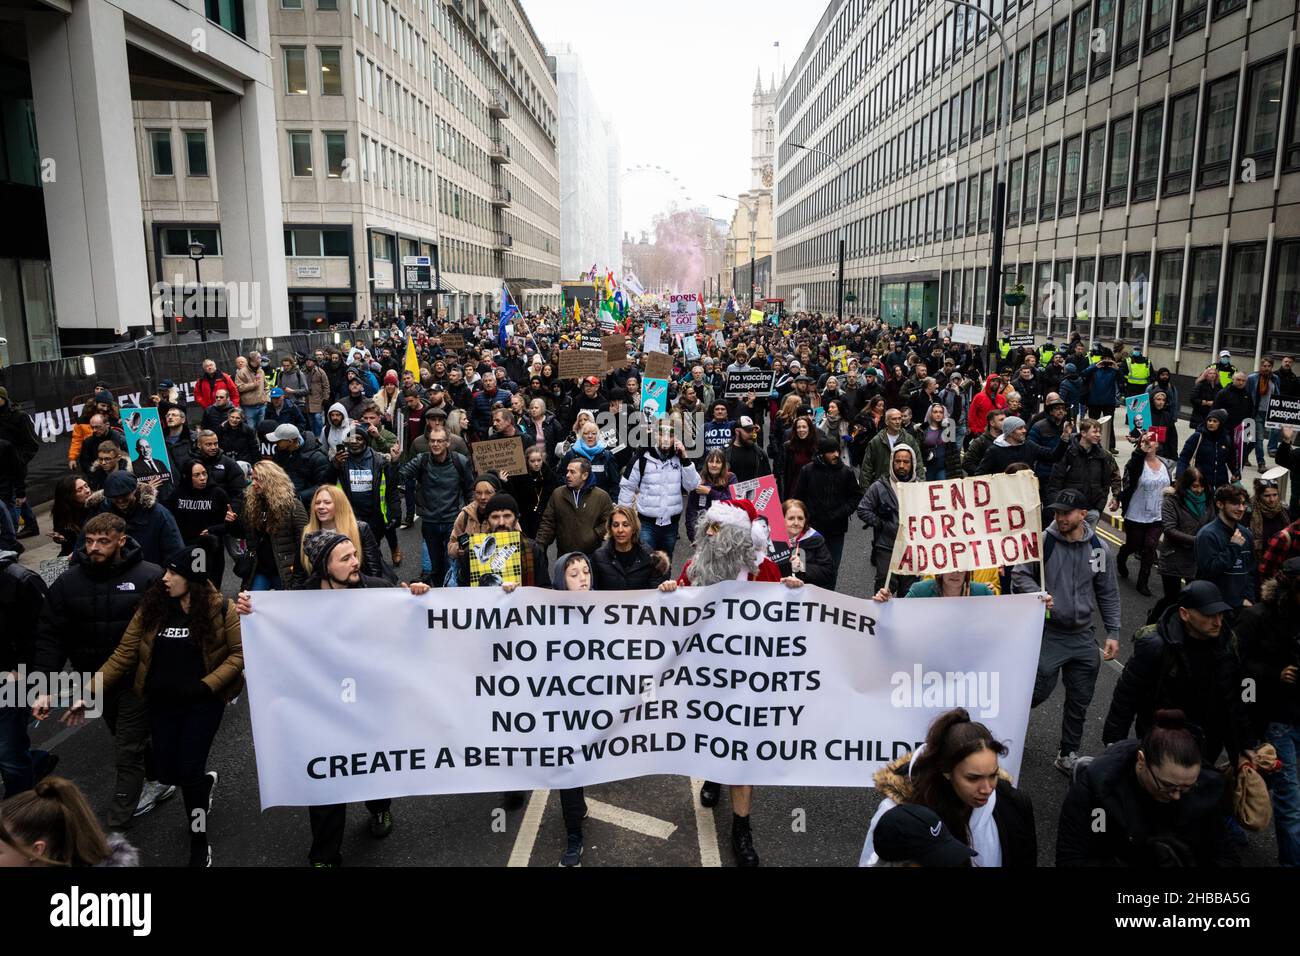 London, UK. 18th Dec, 2021. Protesters march through the city. Thousands of people come out to protest against the latest COVID19 restrictions. Protesters unite for freedom and march through the city to show the government that they do not have faith in their leadership. Credit: Andy Barton/Alamy Live News Stock Photo